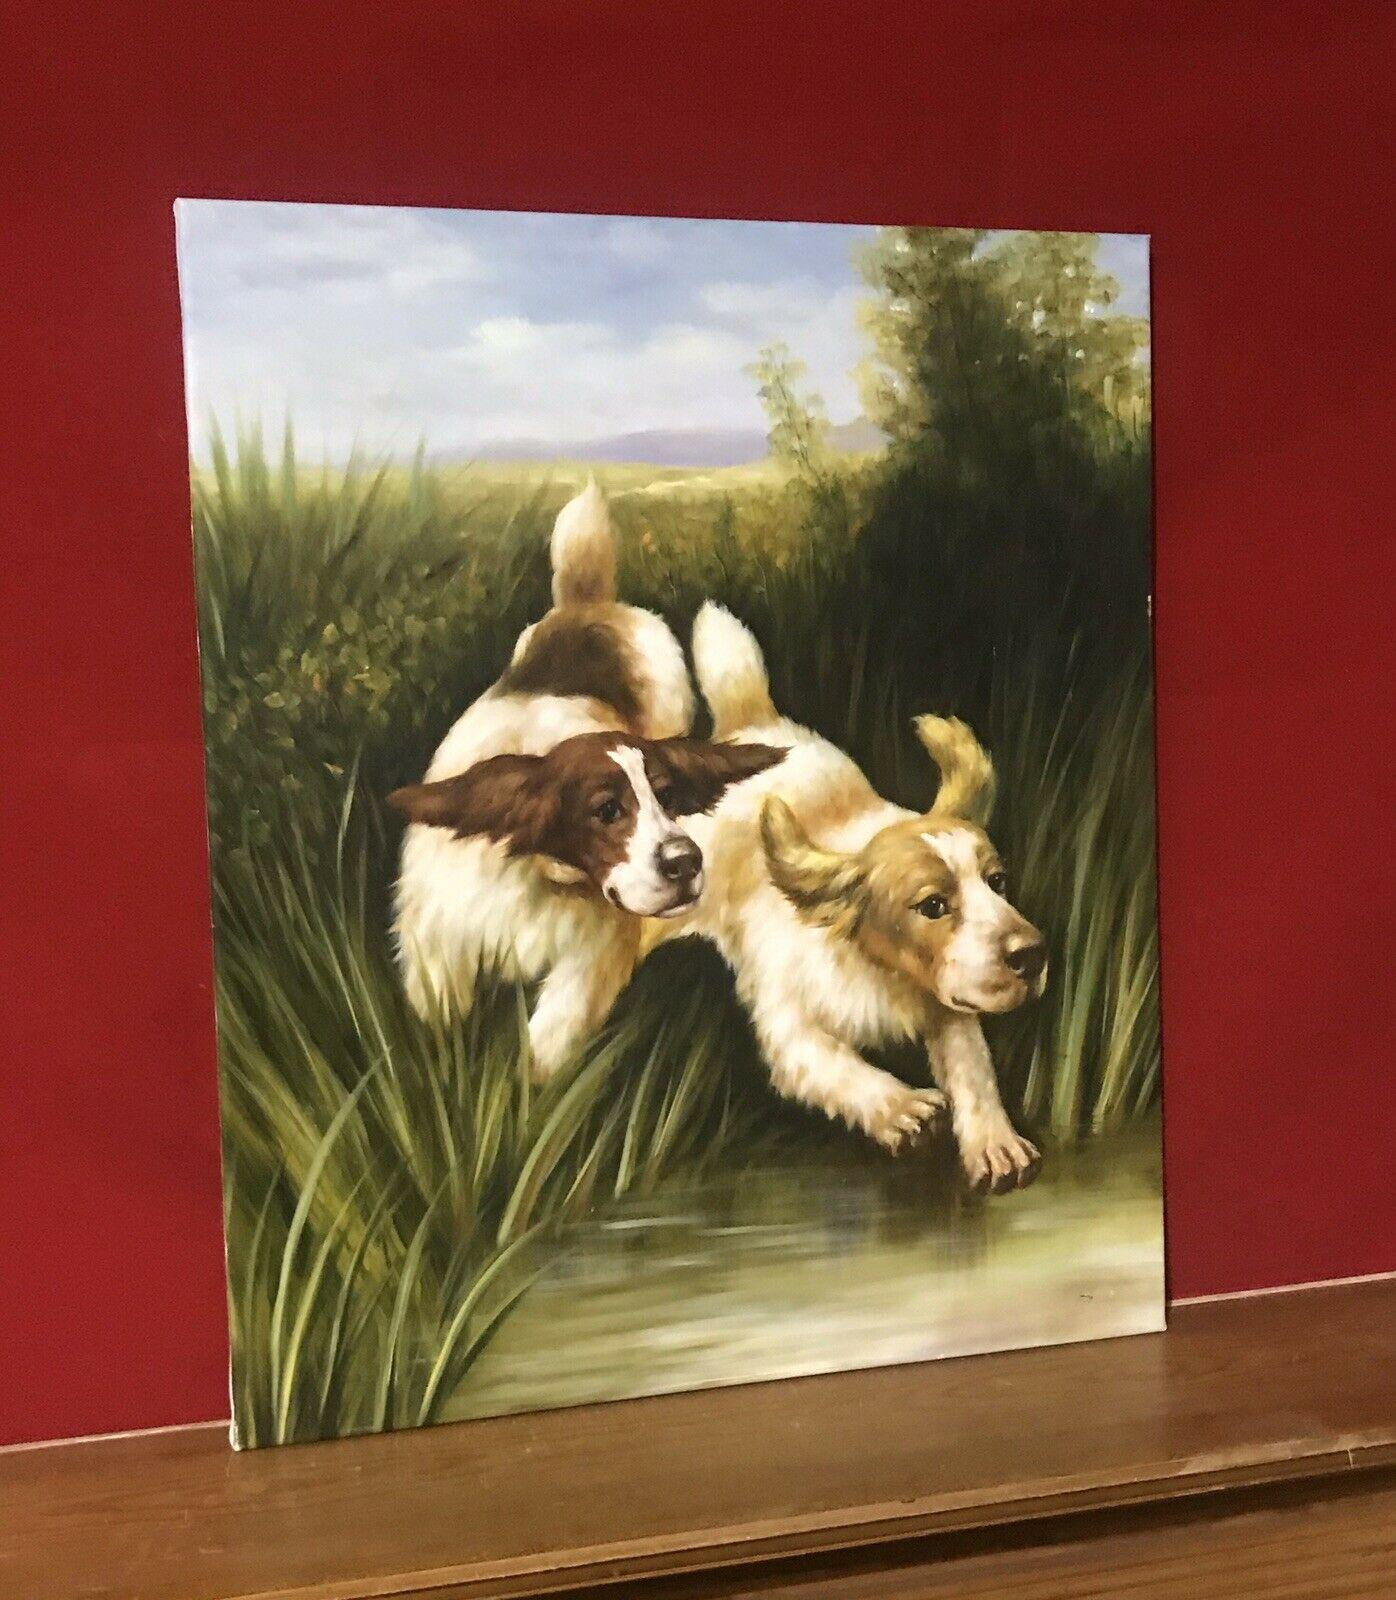 SPANIELS CHASING THROUGH REED BEDS - LARGE OIL PAINTING ON CANVAS - Painting by Unknown